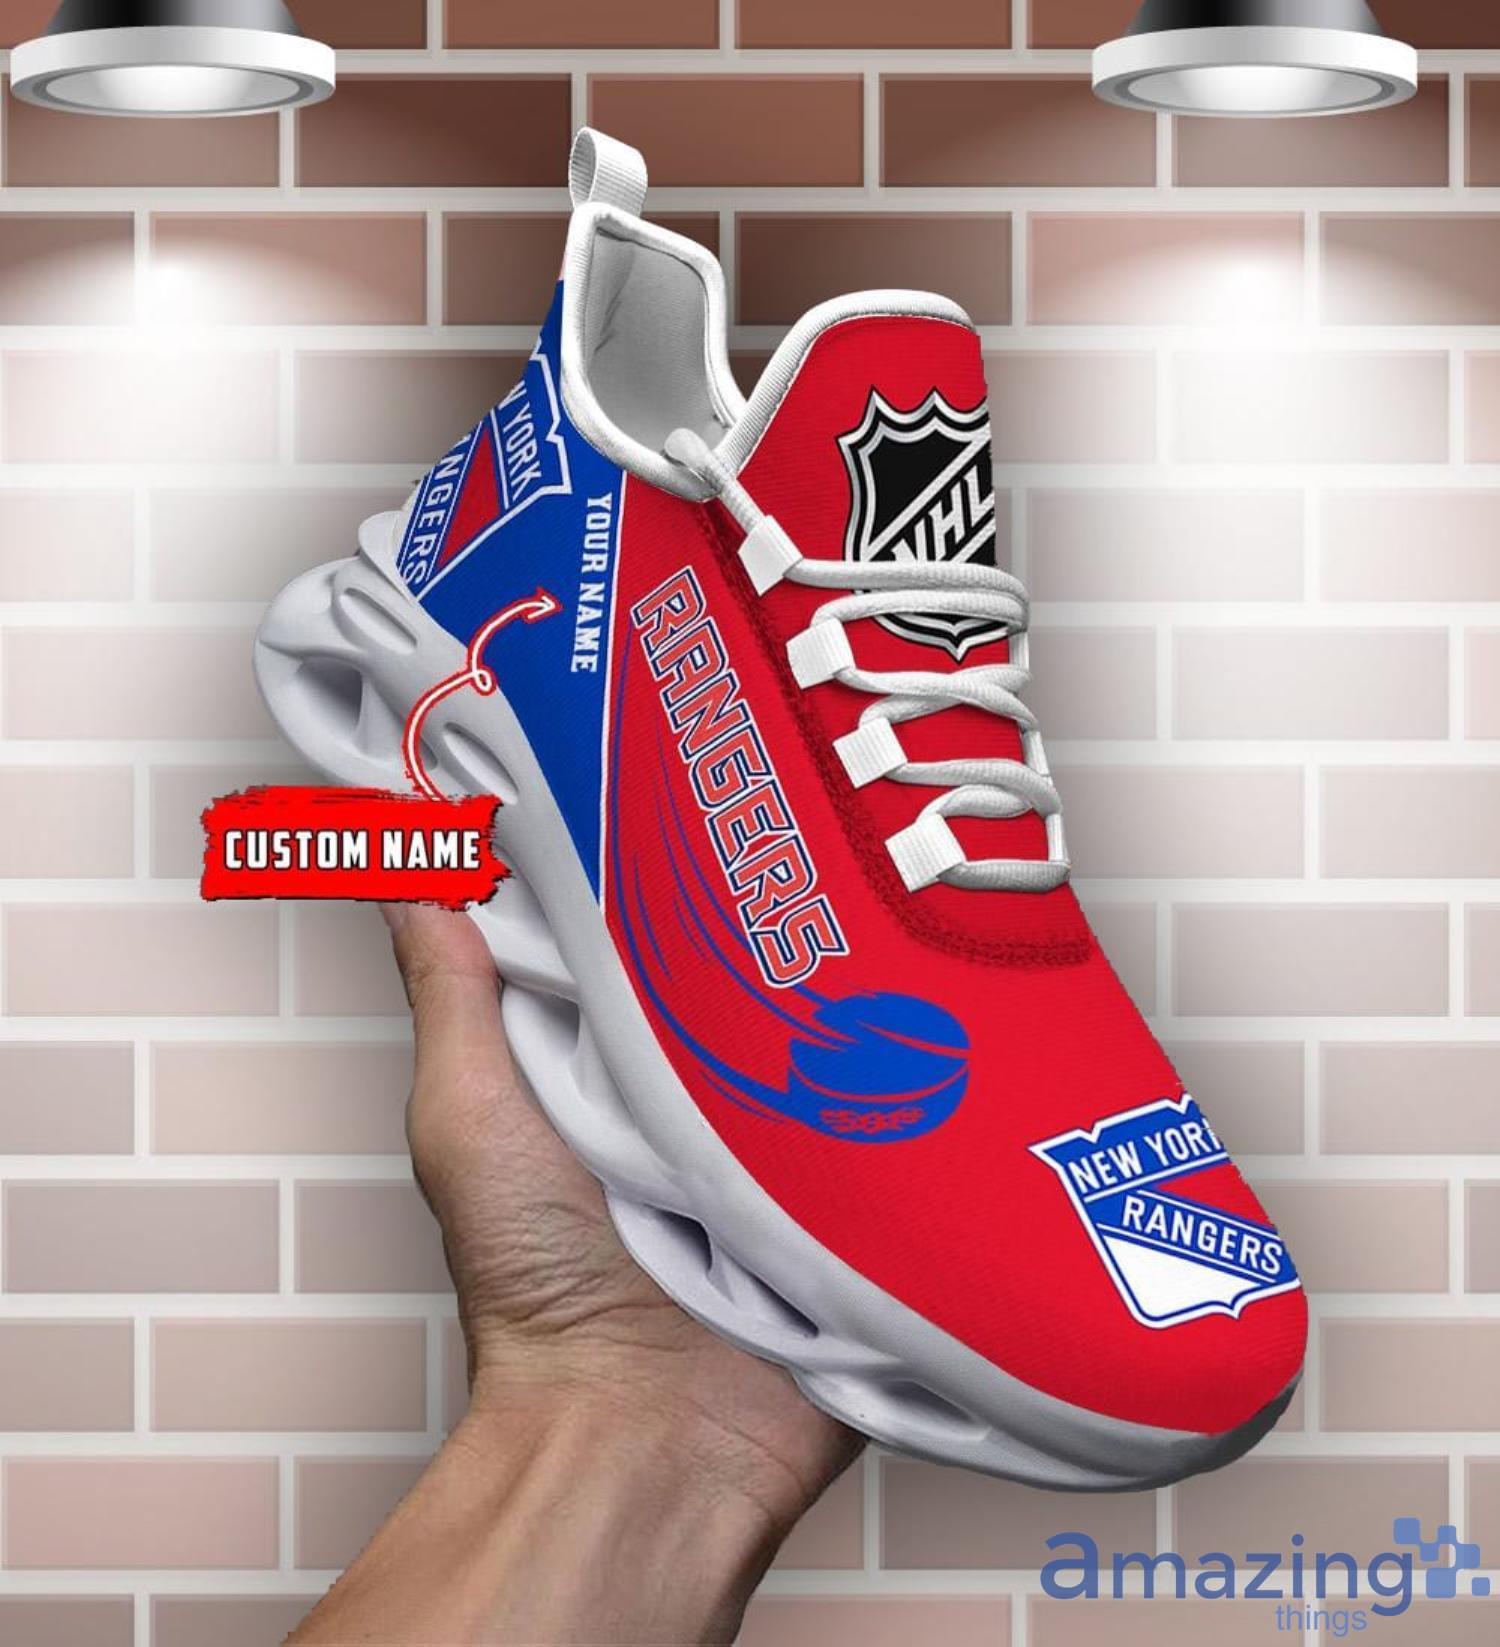 NHL New York Rangers Running Sneakers Yeezy Shoes Men And Women